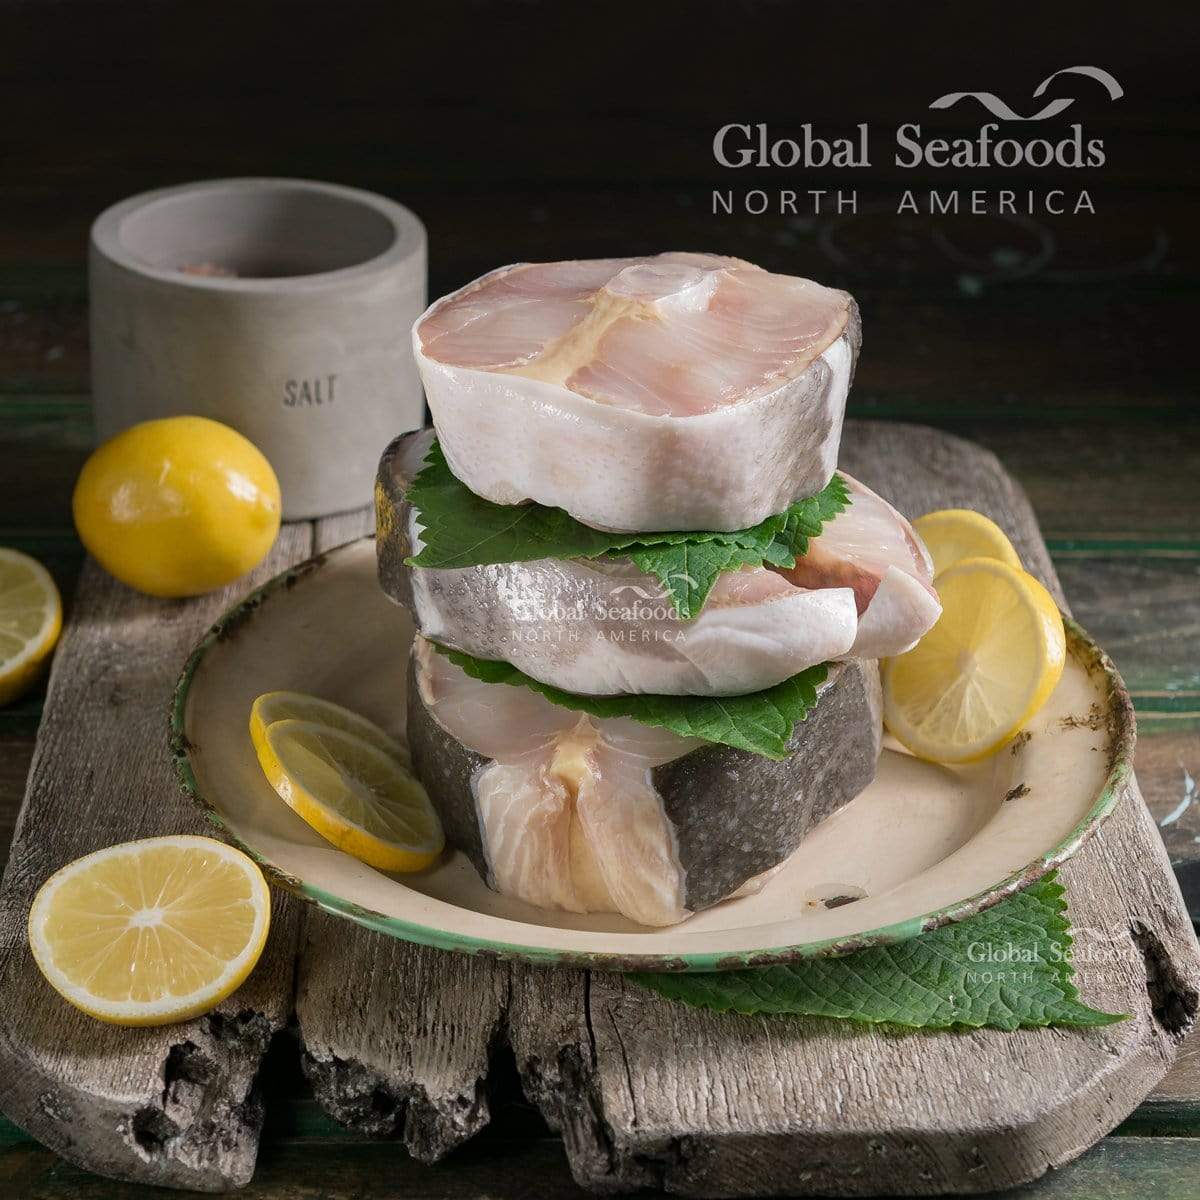 Close-up view of a sturgeon fish from Global Seafoods, showcasing its distinctive features and the top-grade quality of the seafood offered